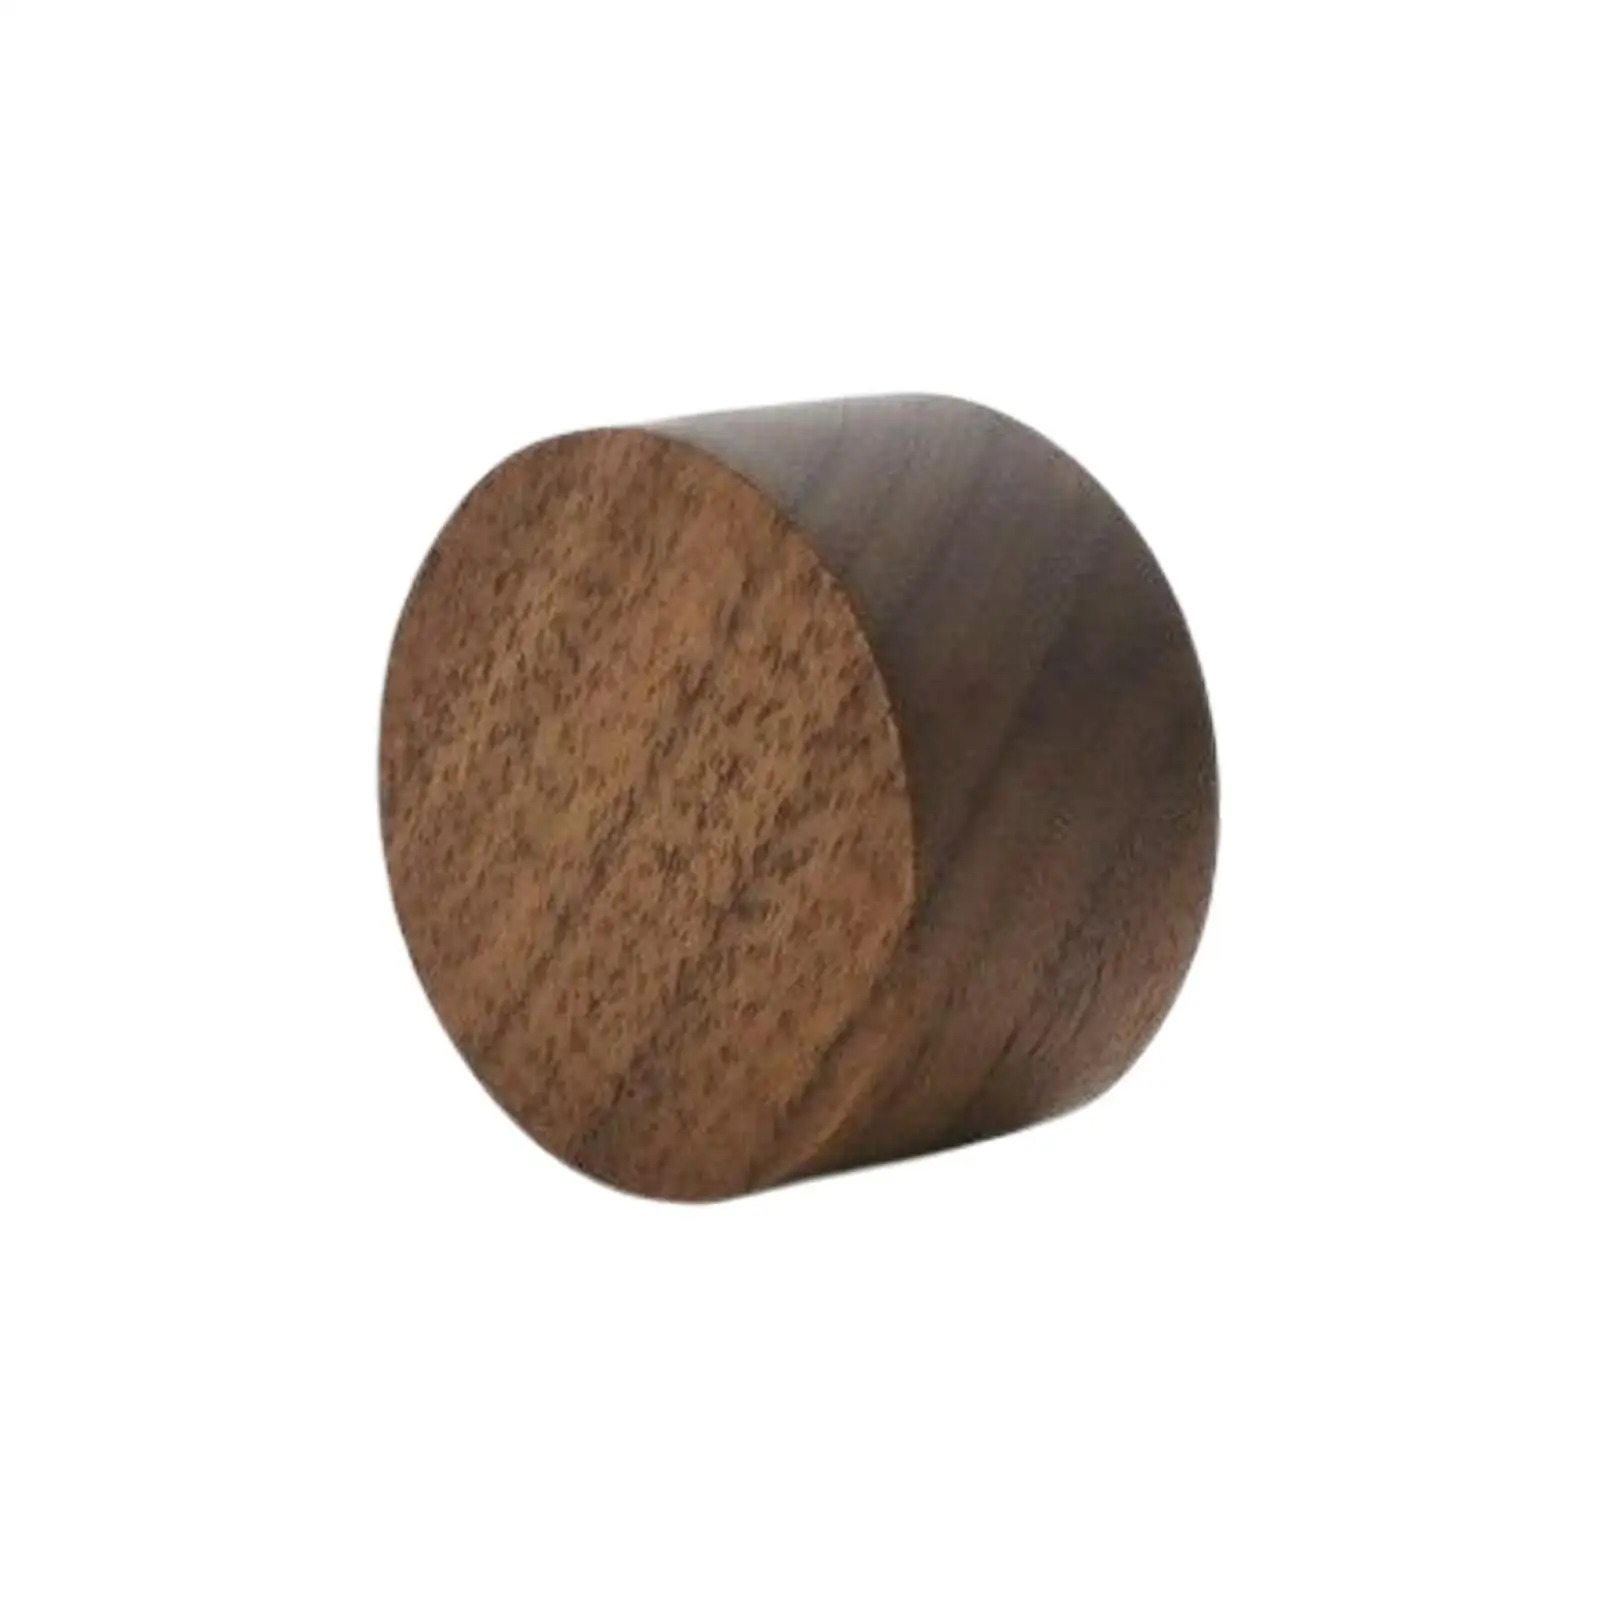 Gas Decorative Wood Knob Outdoor Camping Equipment Part